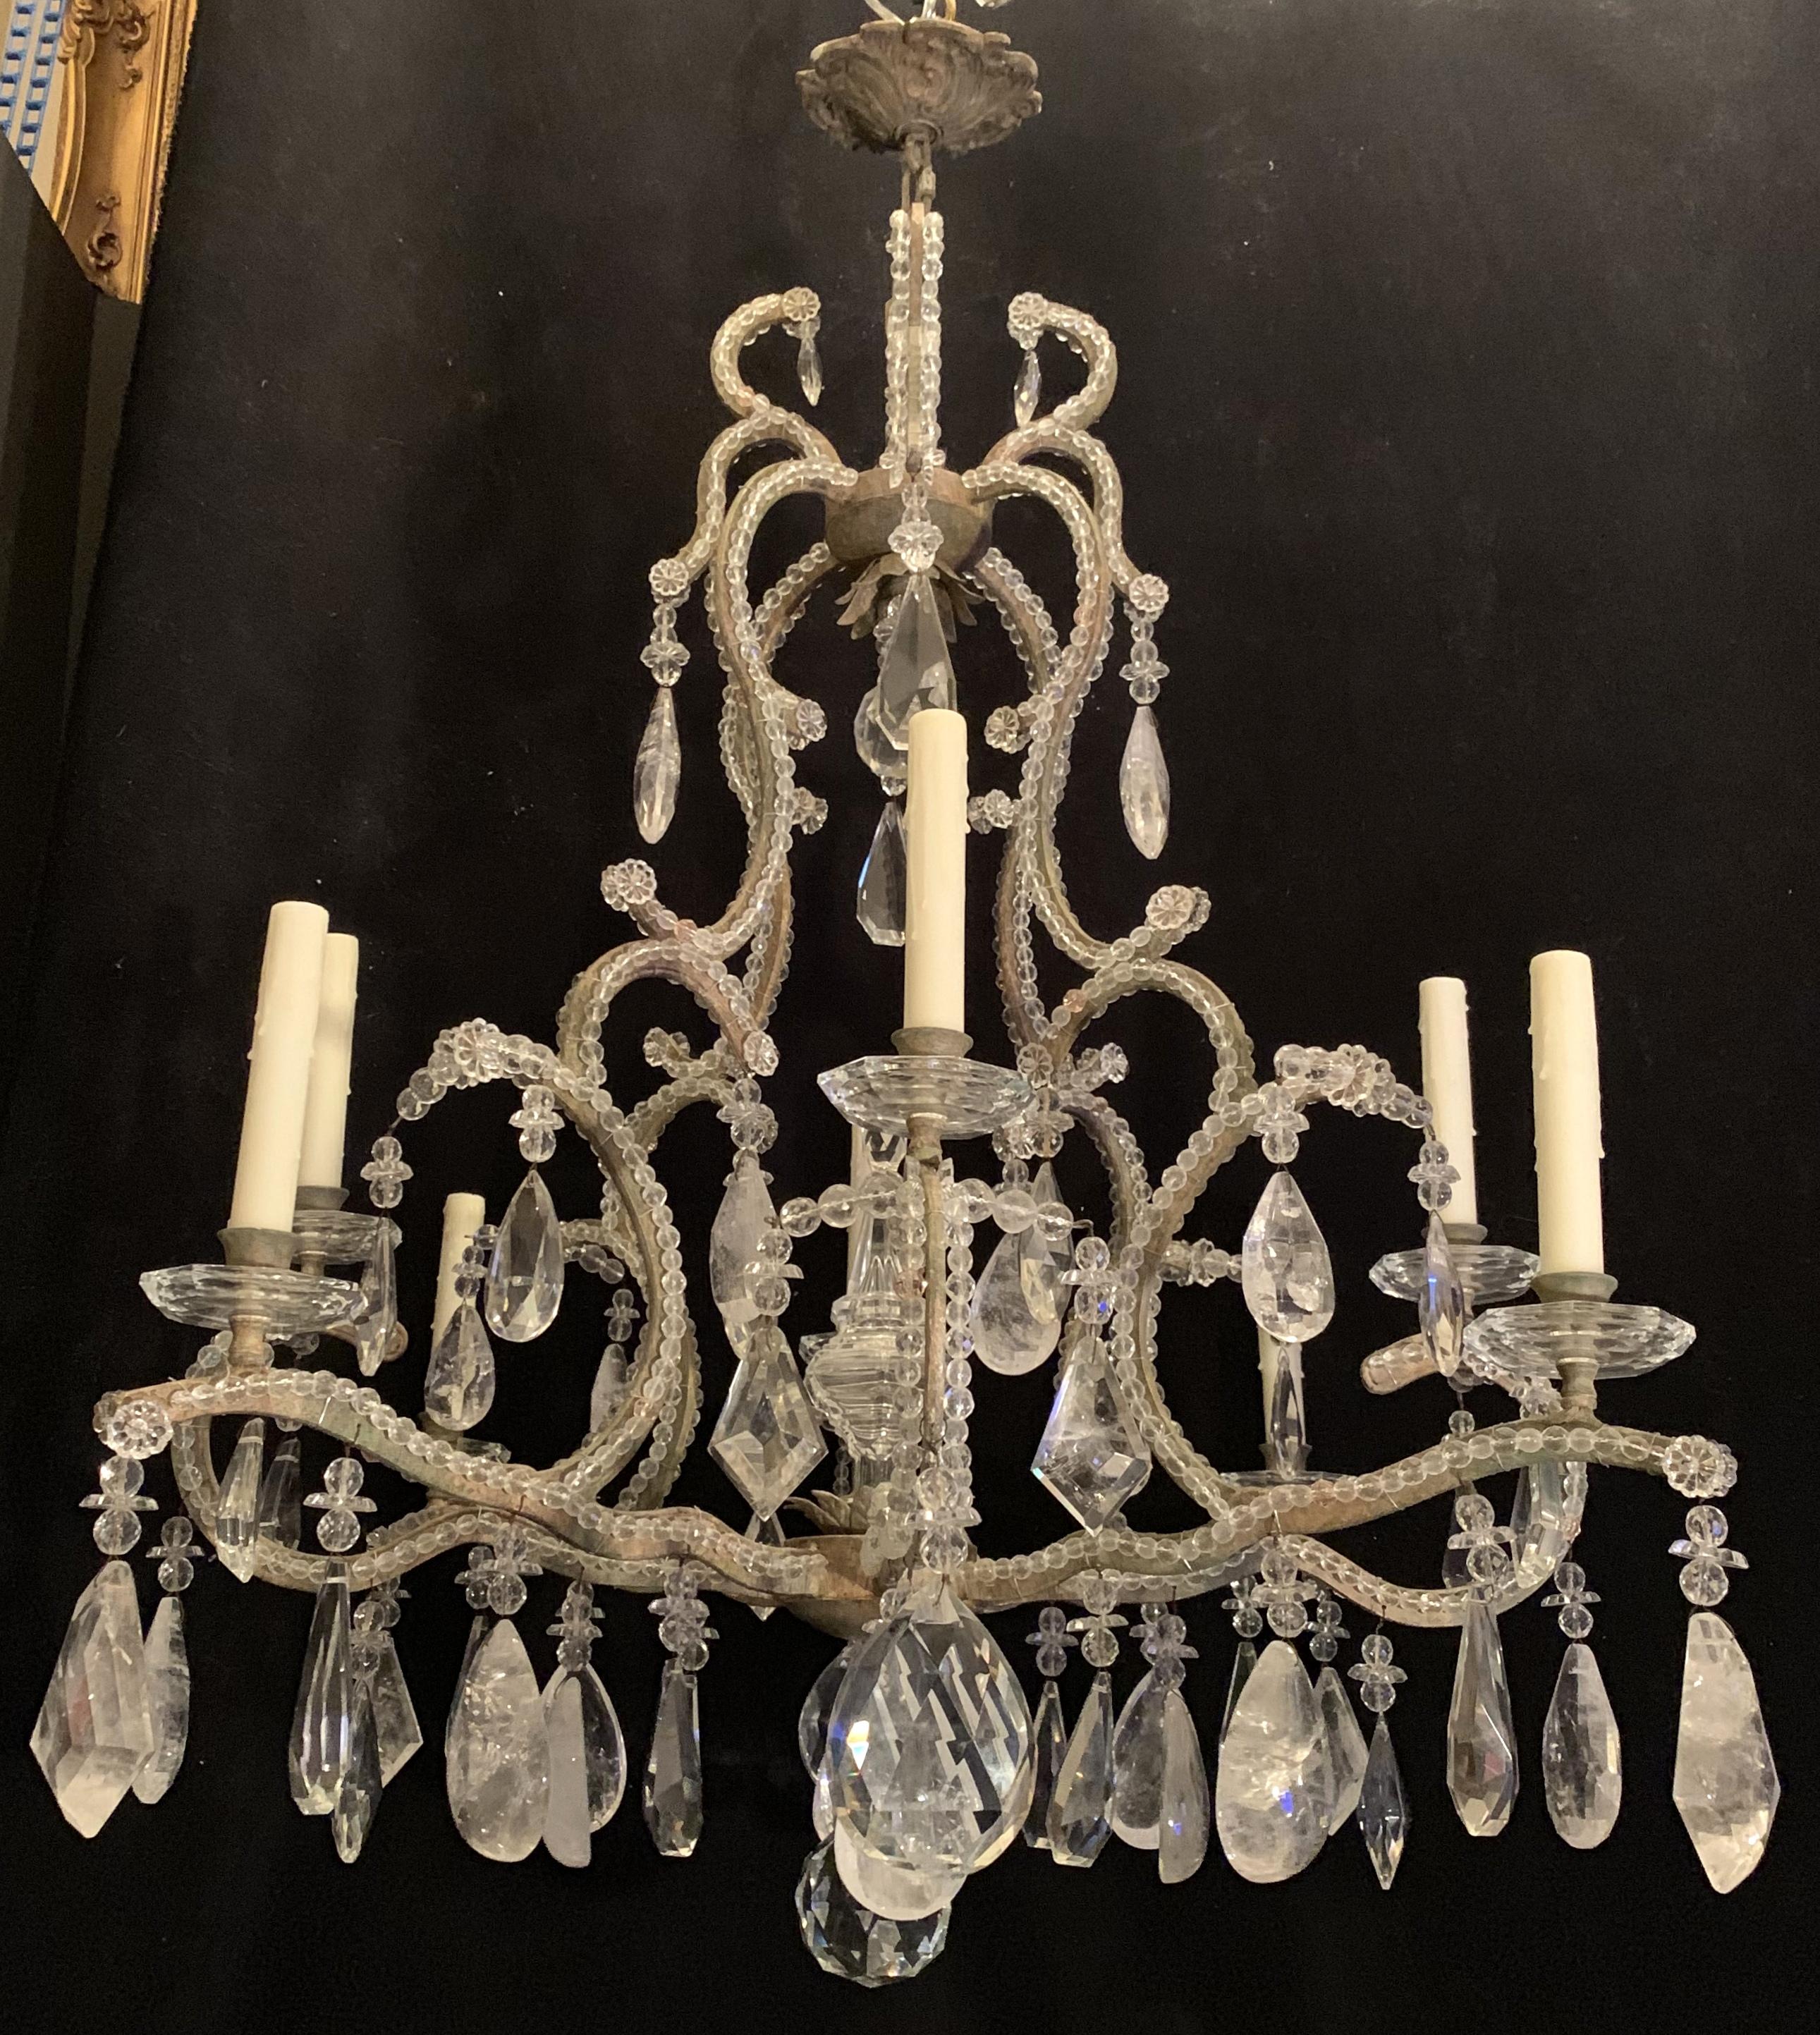 A wonderful large 8 candelabra light chandelier with crystal beaded trim and rock crystal prisms and pendants. A center prism ball and large finial accent the center of this chandelier.
Wiring is up to date and is accompanied by chain and canopy